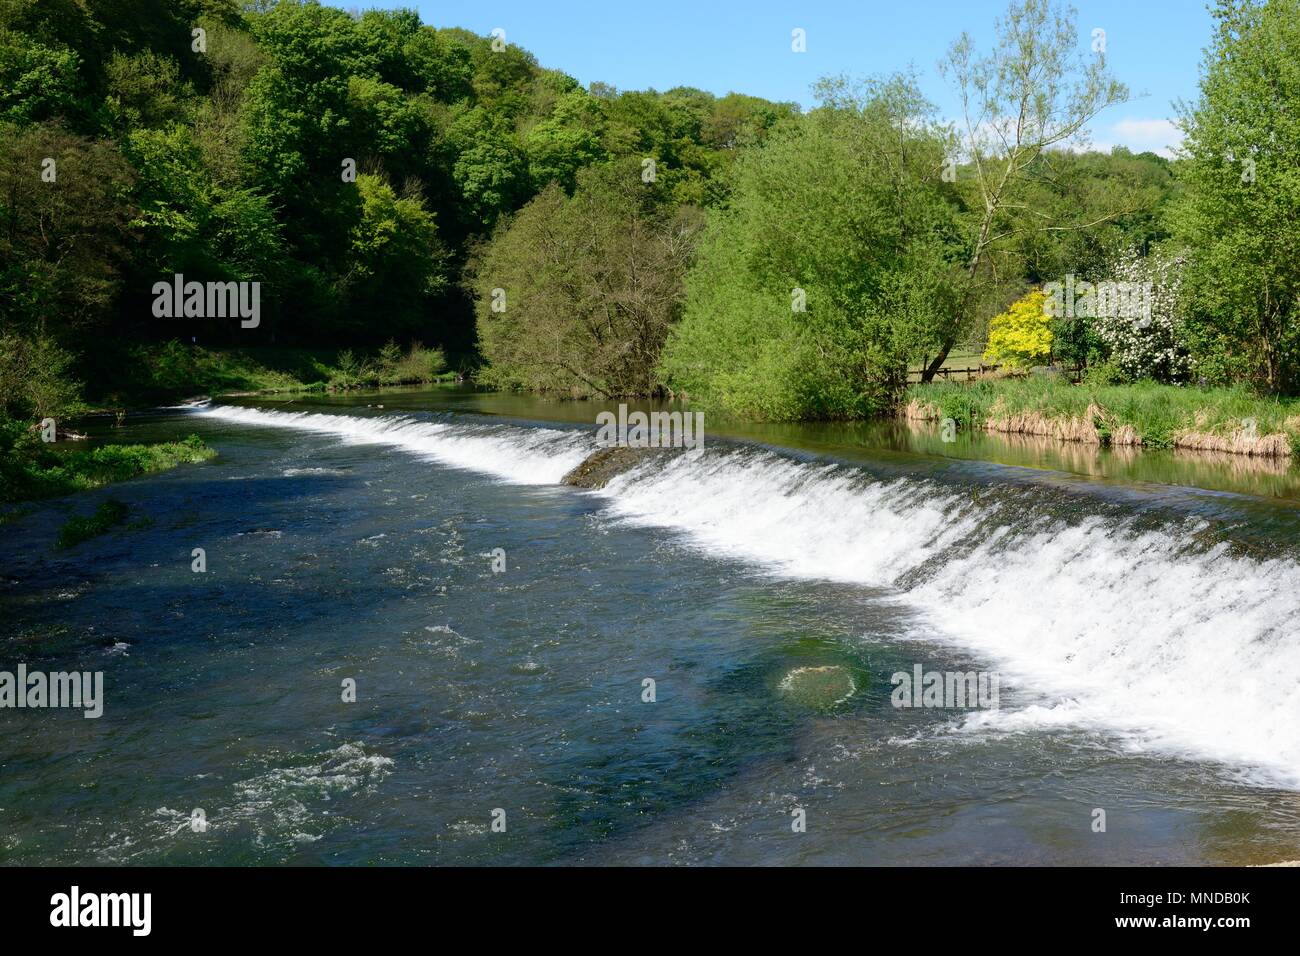 Weir  on river Teme A Grade 2 Listed Building  probably medieval in origin Ludlow Shropshire England UK Stock Photo